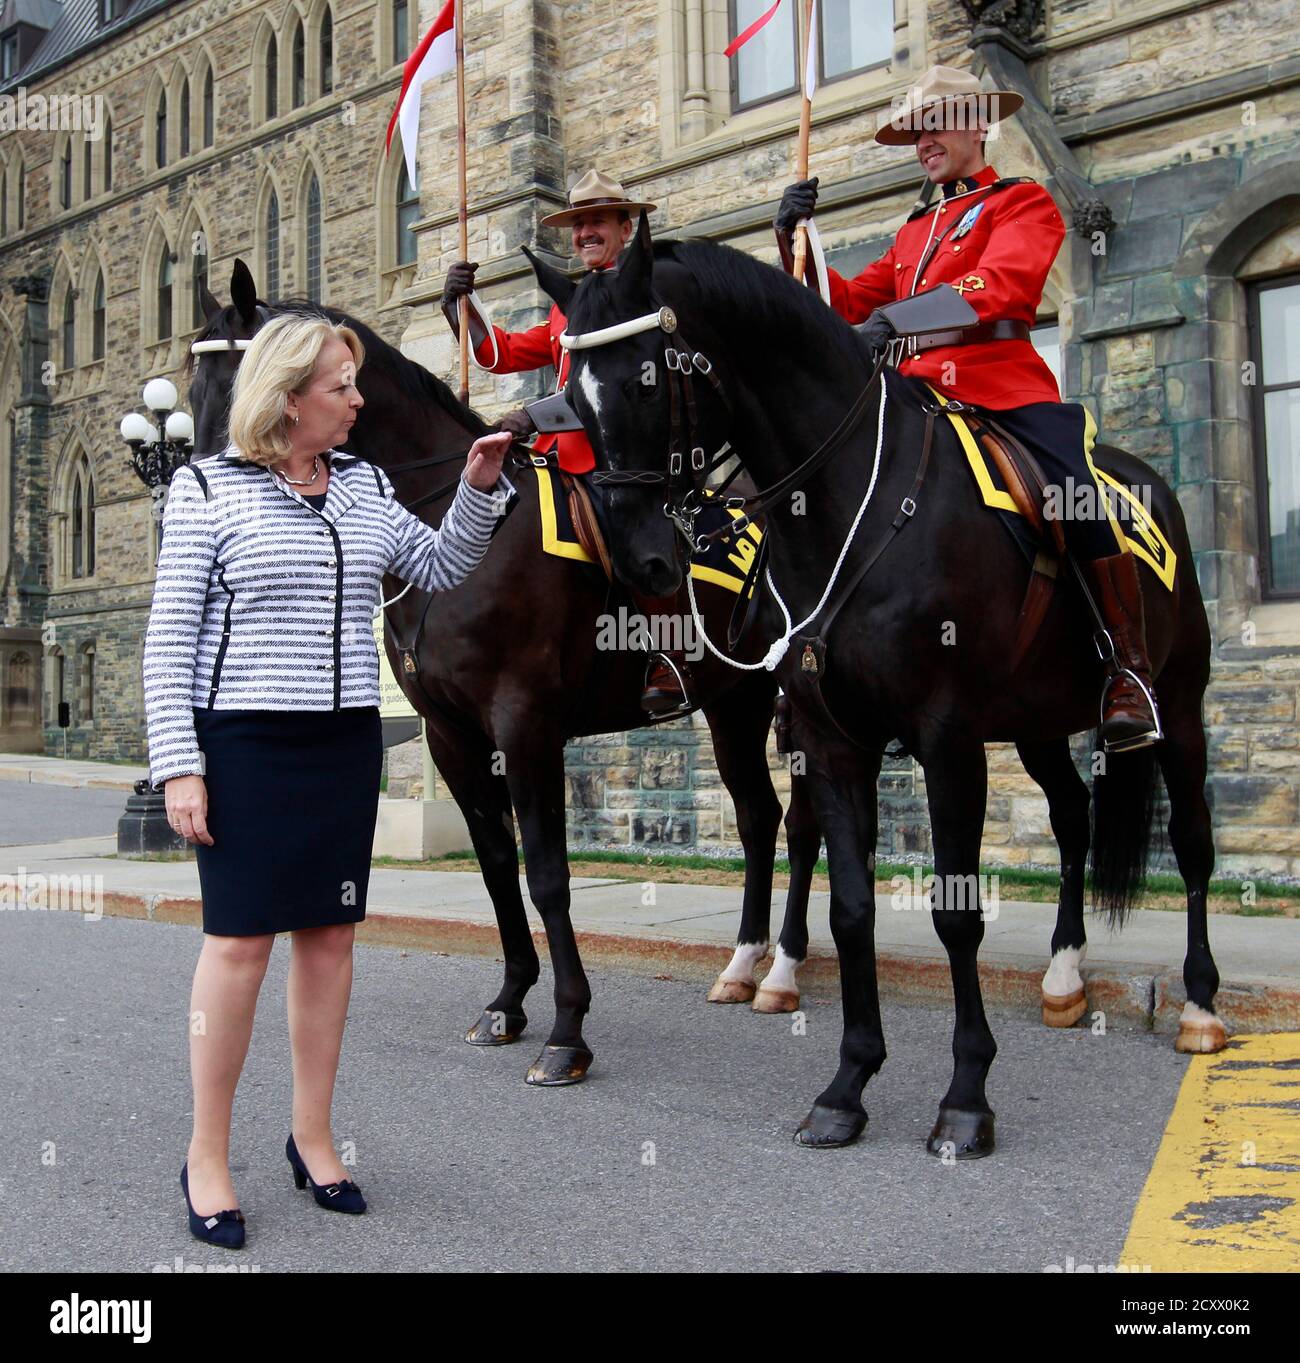 Hannelore Kraft, President of the Federal Council of Germany and North Rhine-Westphalia's state premier, pets a Royal Canadian Mounted Police horse during a visit on Parliament Hill in Ottawa September 8, 2011.       REUTERS/Chris Wattie       (CANADA - Tags: POLITICS) Stock Photo